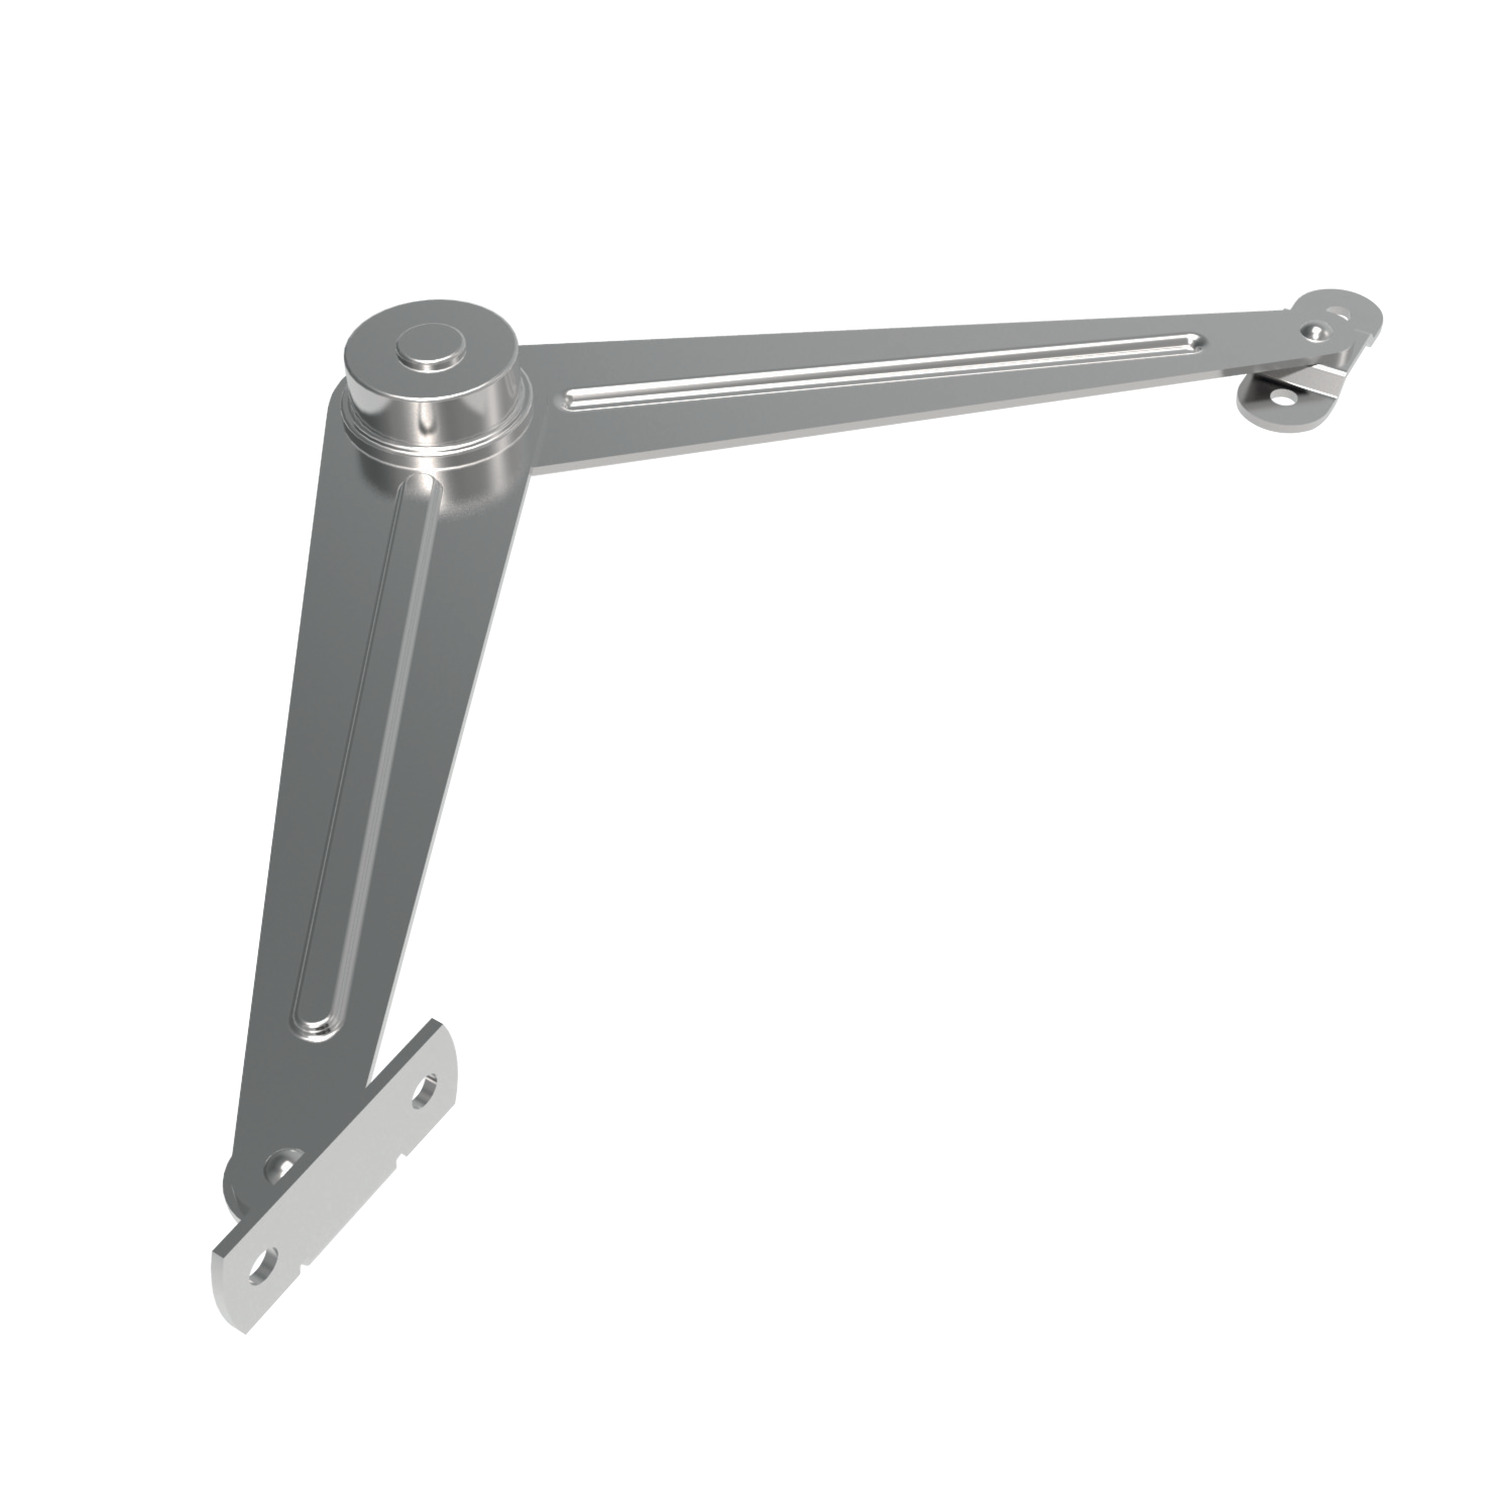 Lid Stays - Upward Opening Lid Made in Steel, Fitted with positioning spring and steel ball at pivot point to provide positive stop. Right and left handed available.